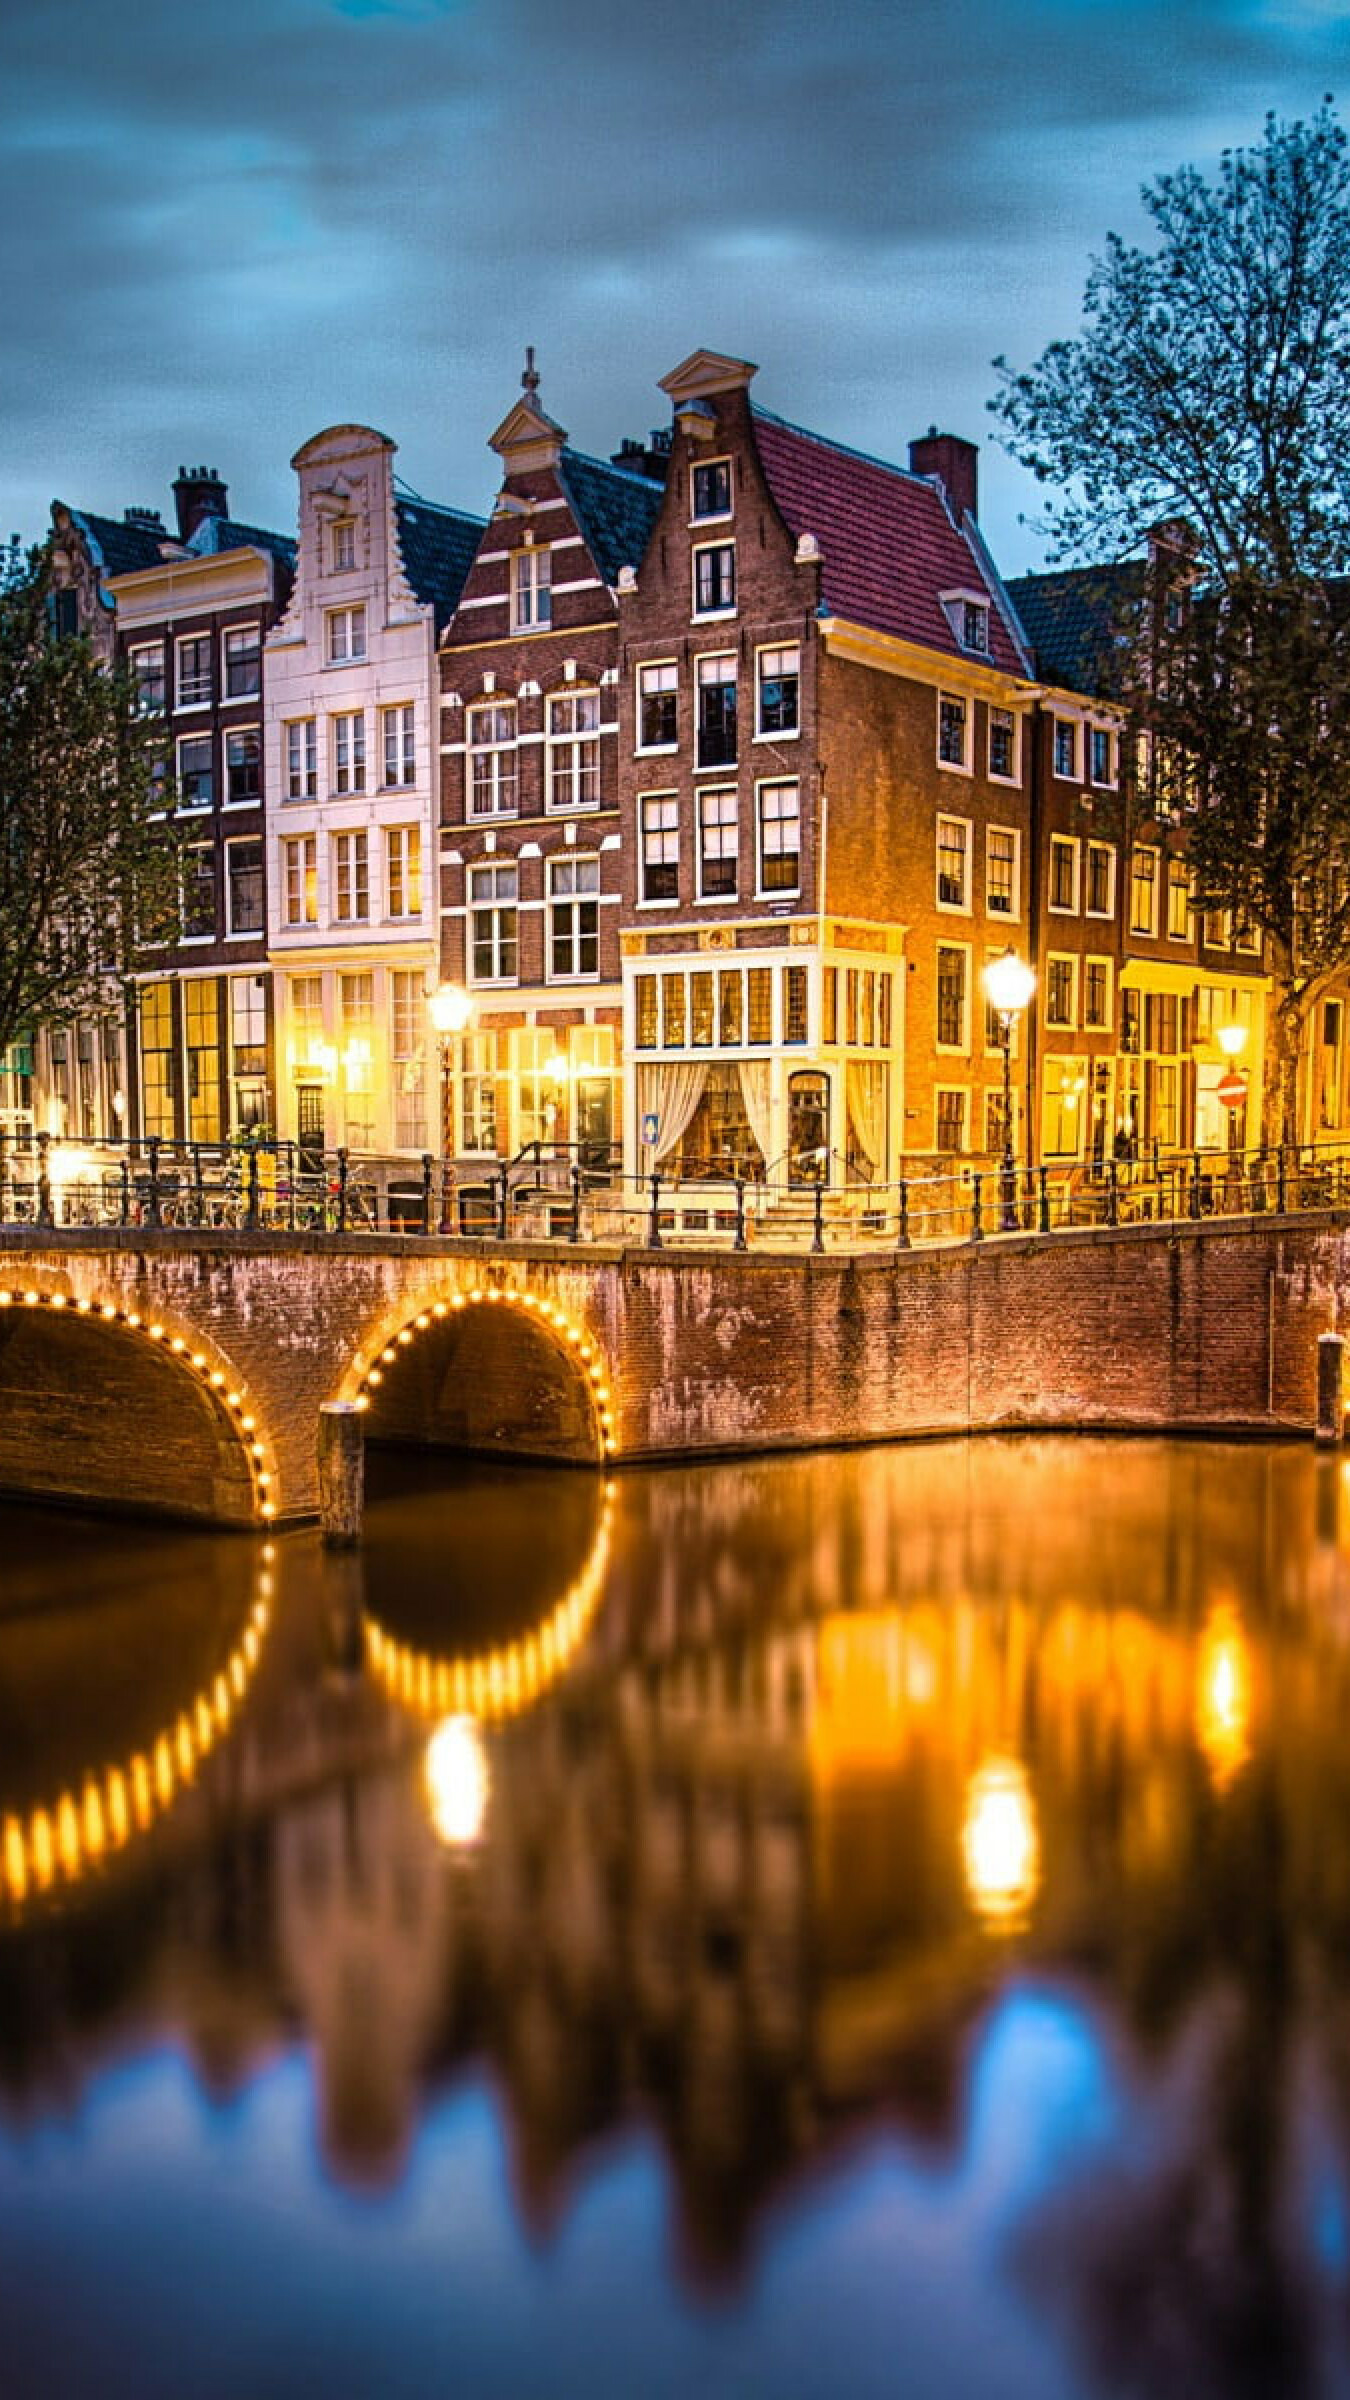 Amsterdam: “Venice of the North”, Large number of canals, A UNESCO World Heritage Site. 1350x2400 HD Wallpaper.